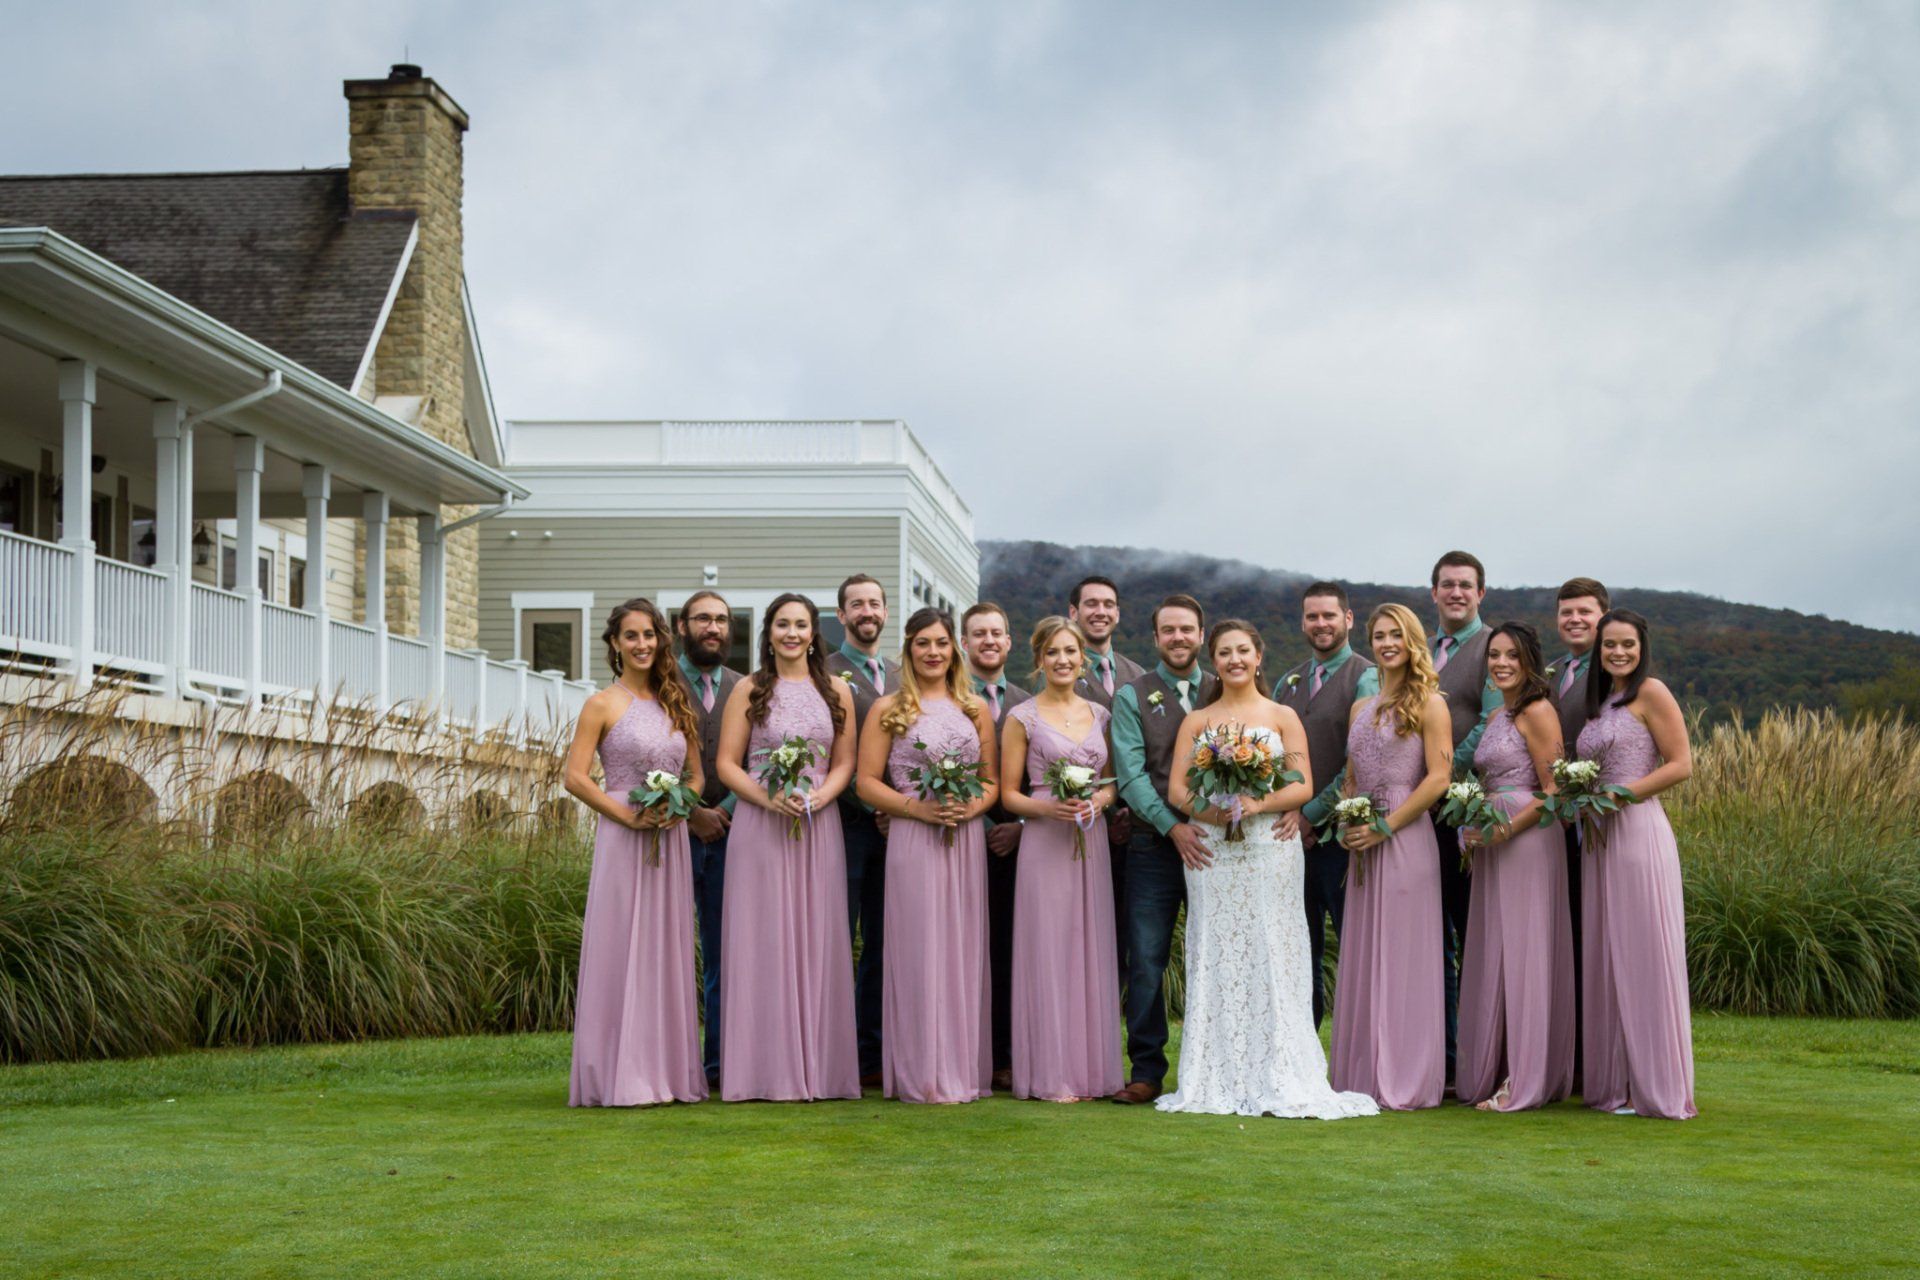 A group portrait of the bridal party on a green lawn with mountains and the venue in the background